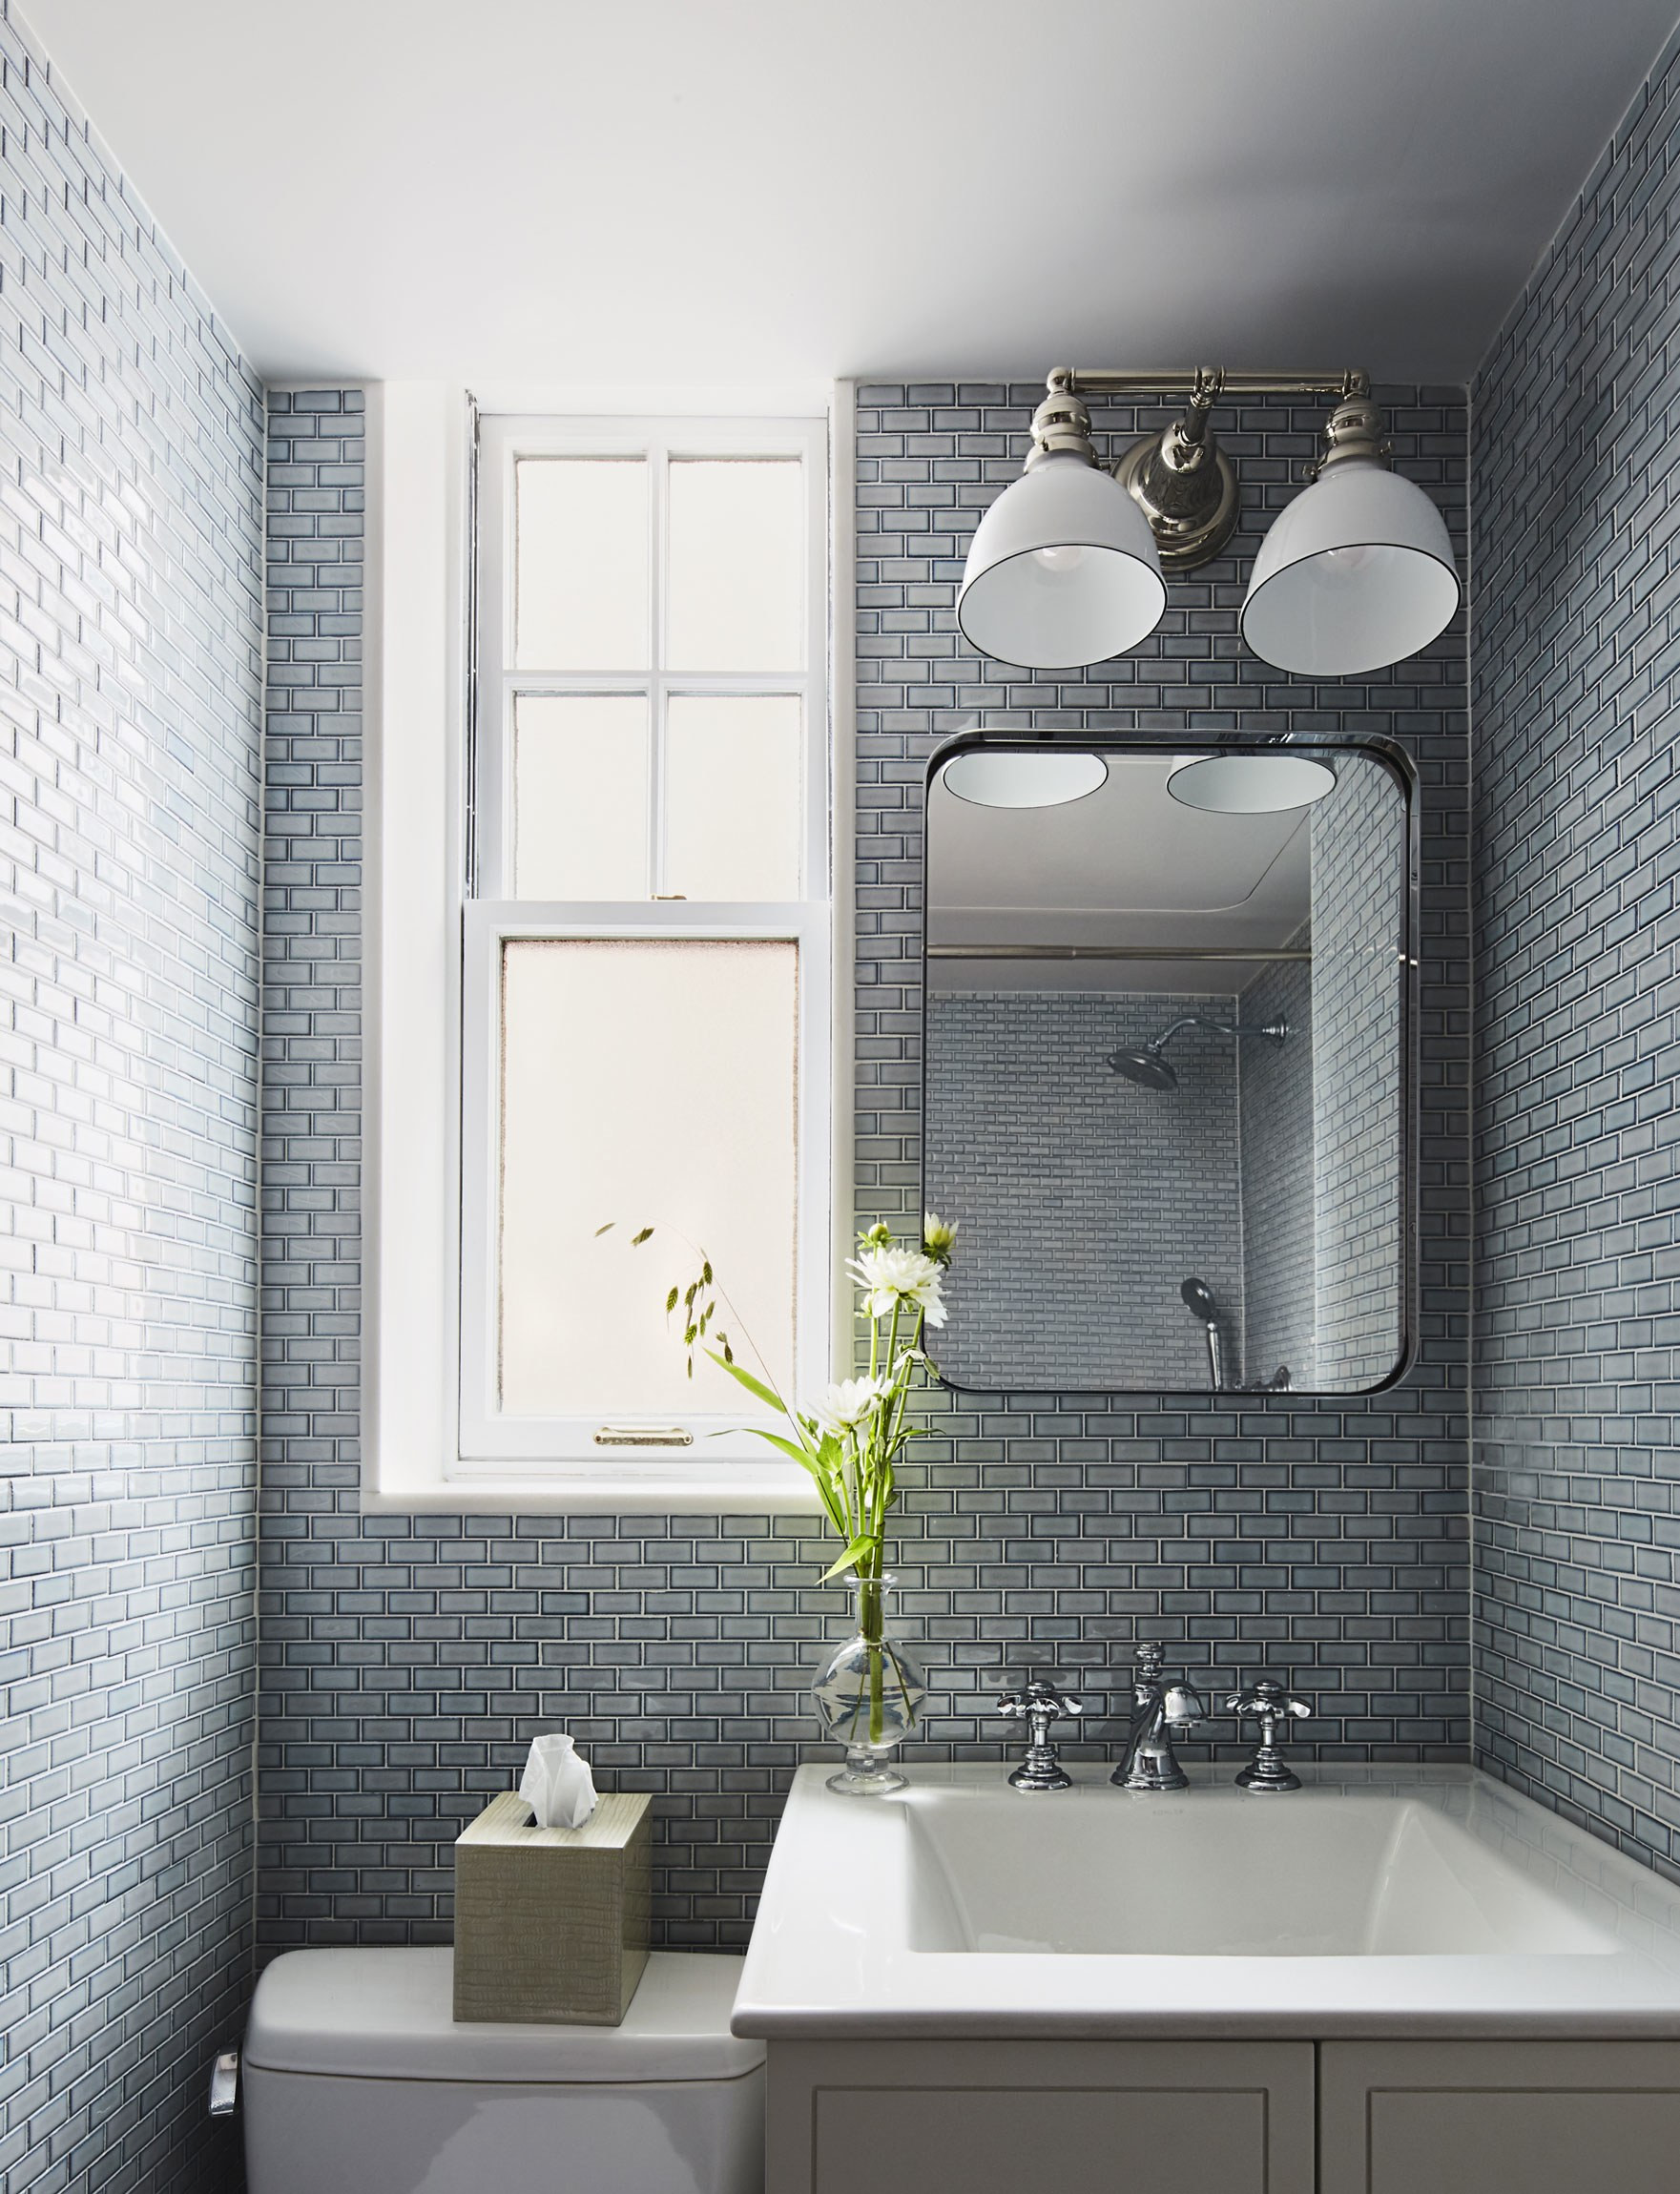 Pictures For Bathroom Walls
 This Bathroom Tile Design Idea Changes Everything